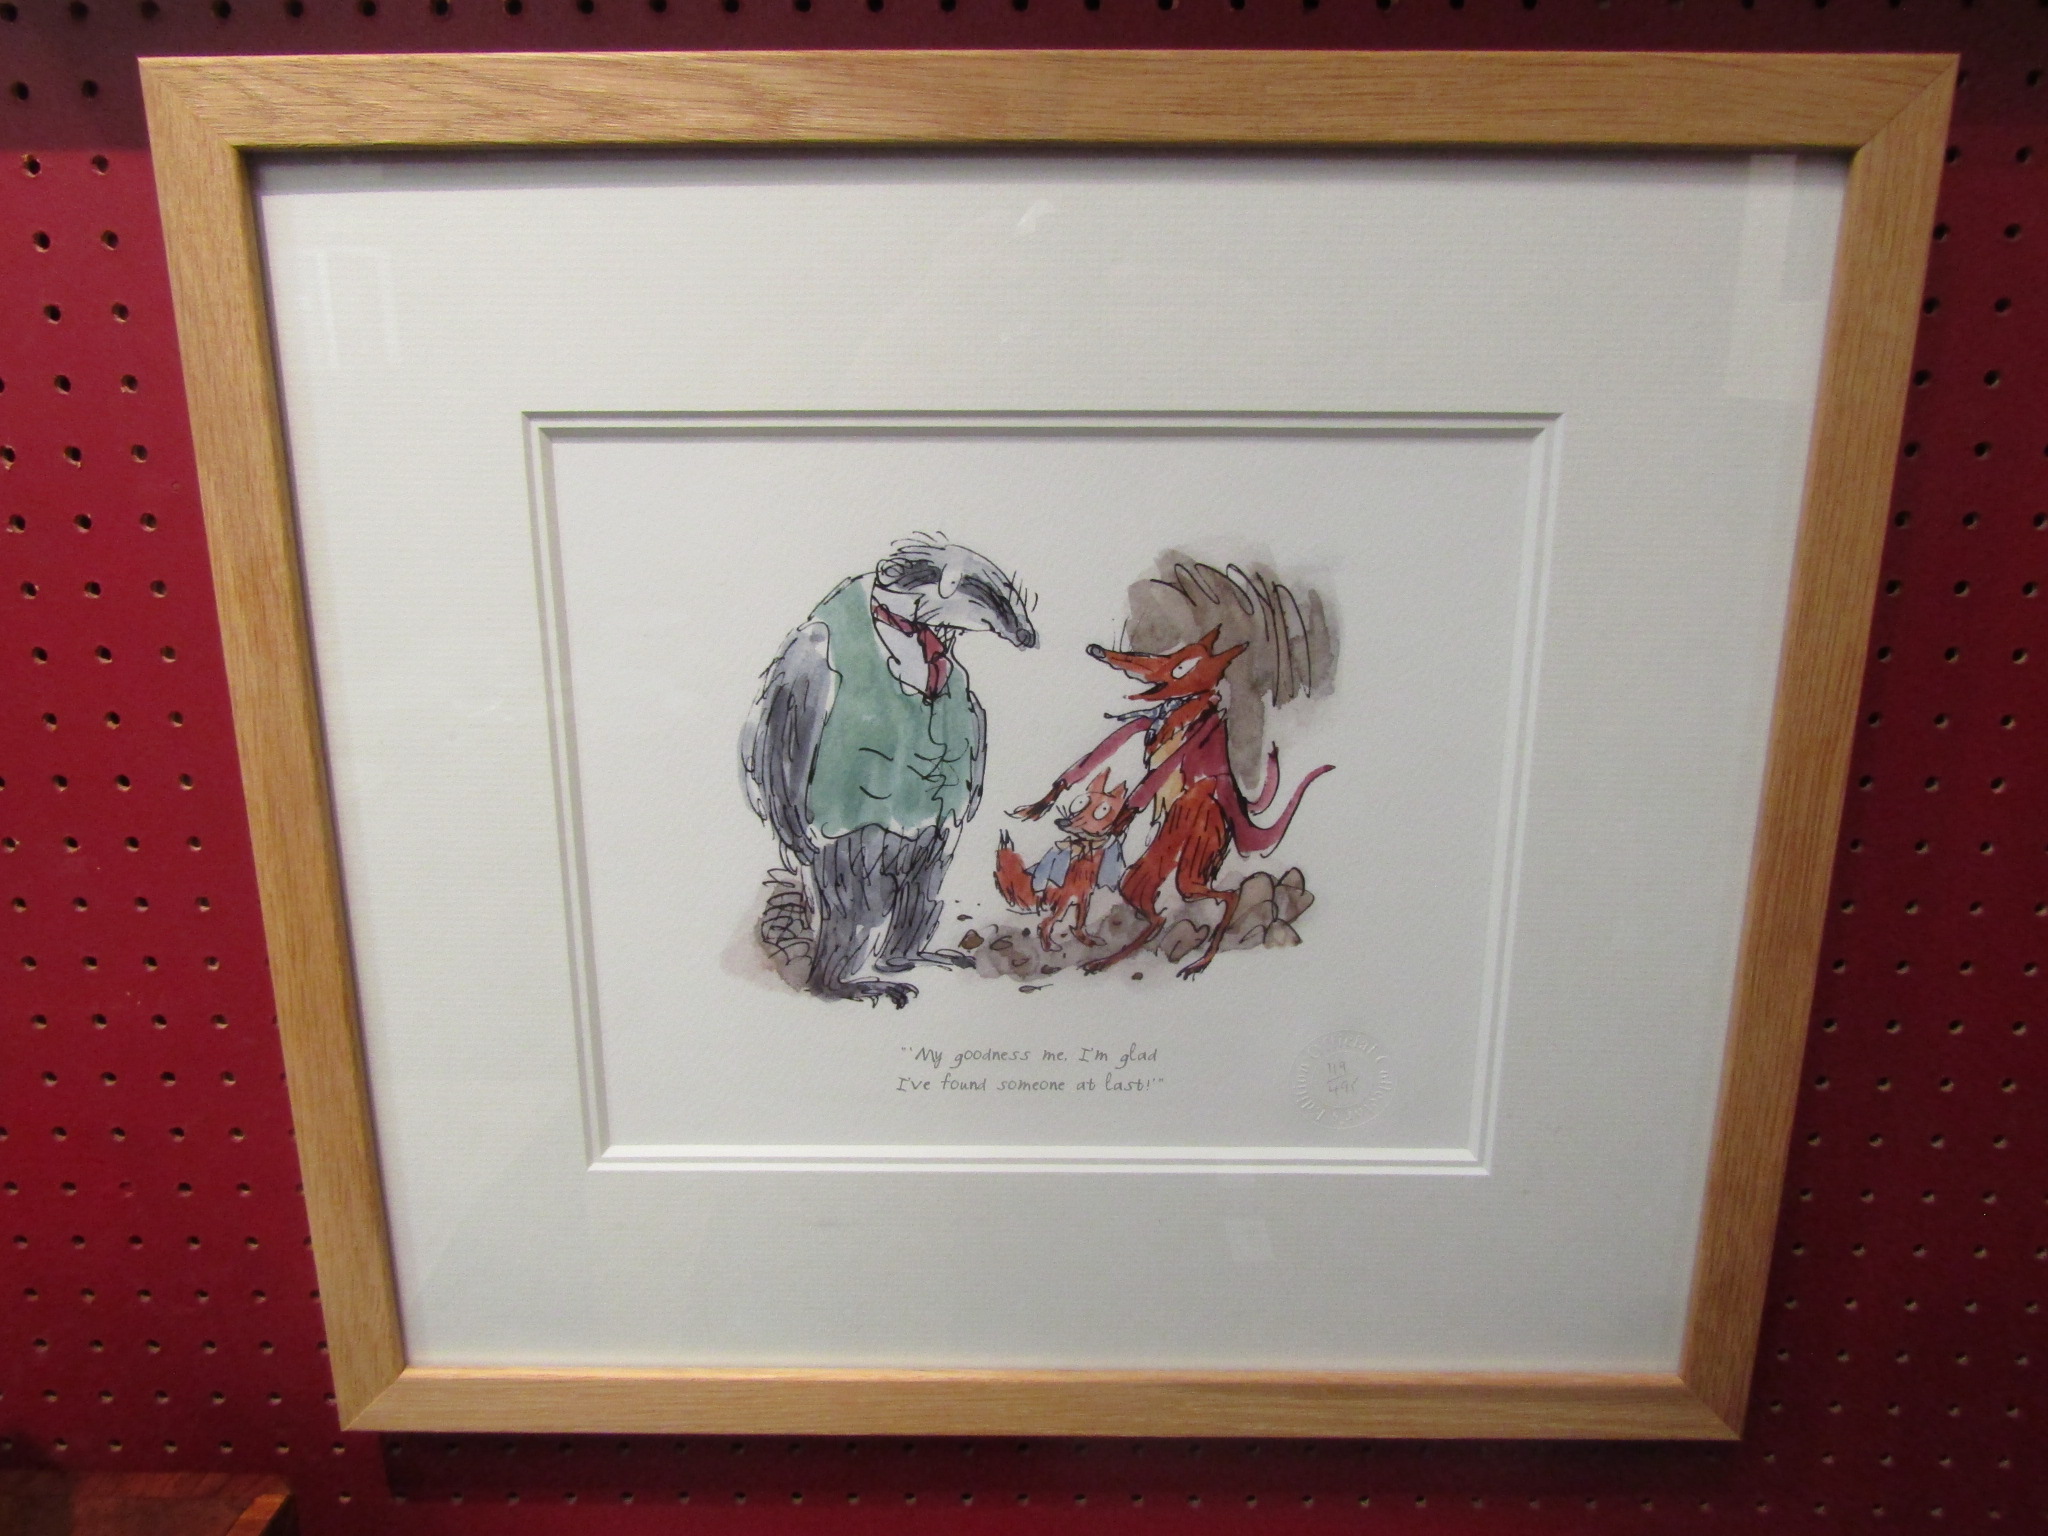 Roald Dahl limited edition print "My goodness me, I'm glad I've found someone at last",